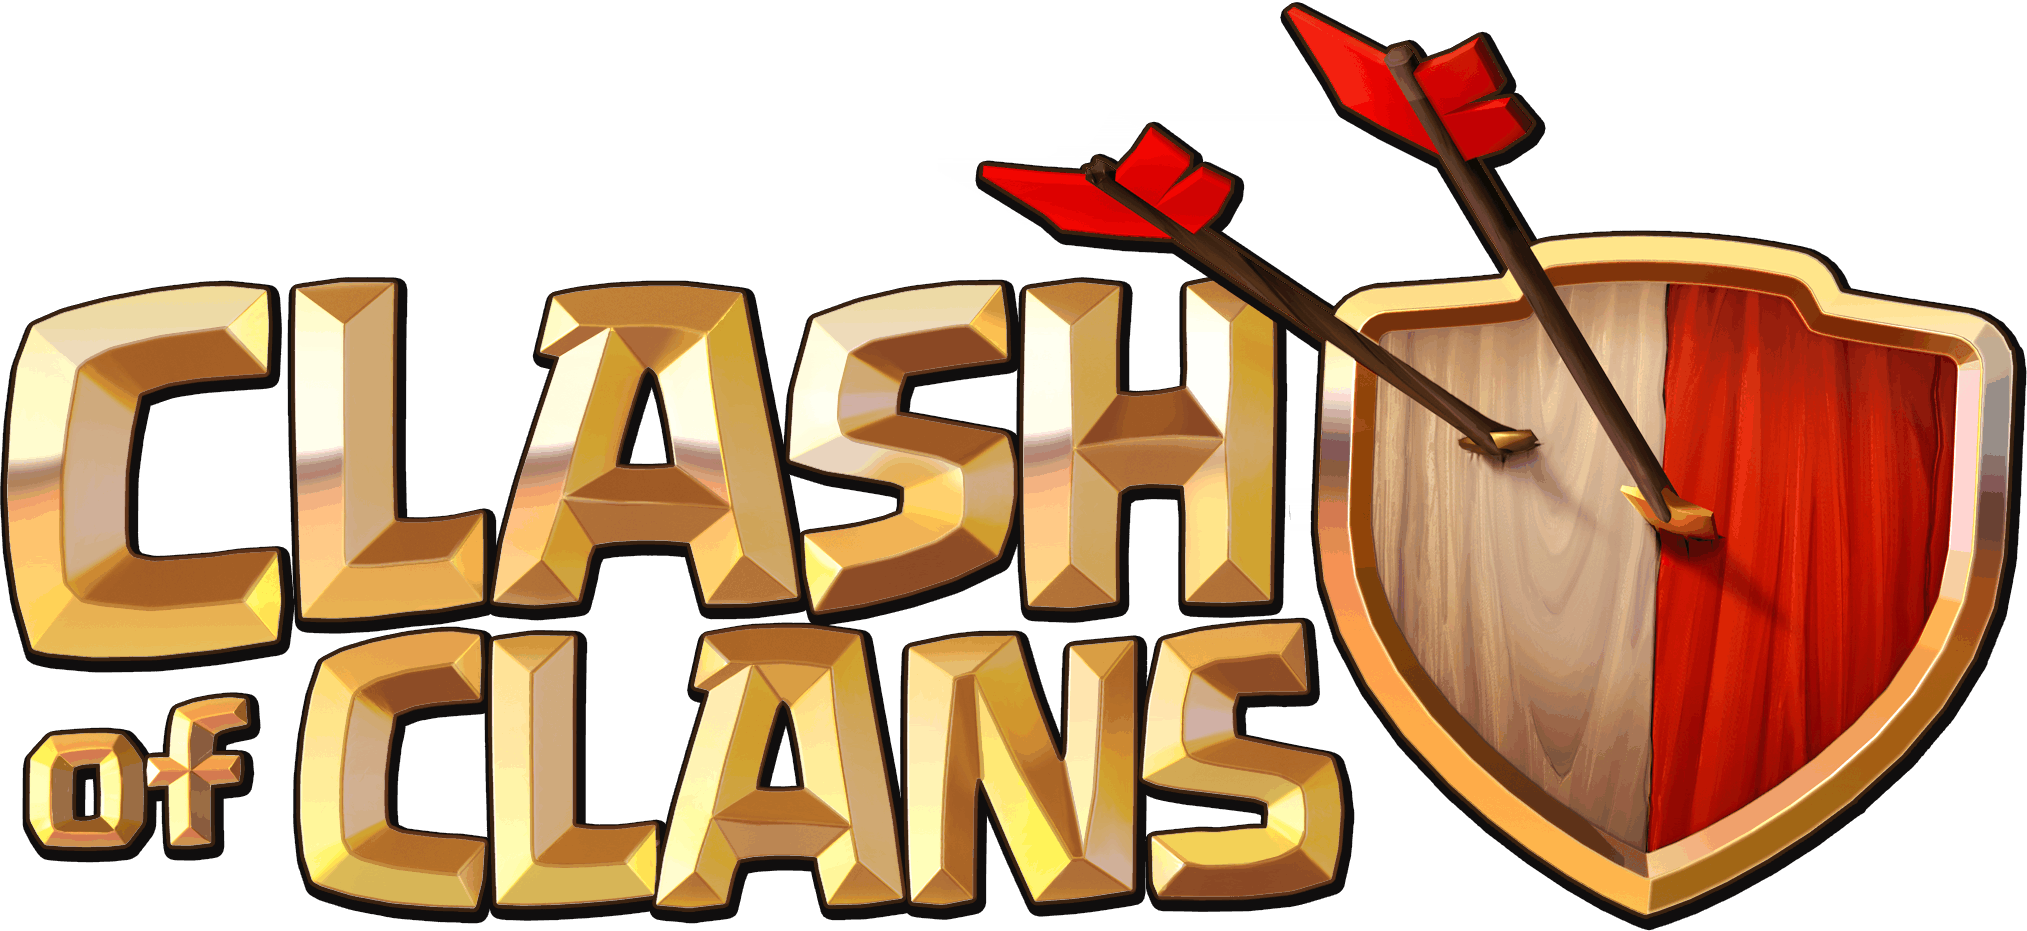 Problems at Clash of Clans